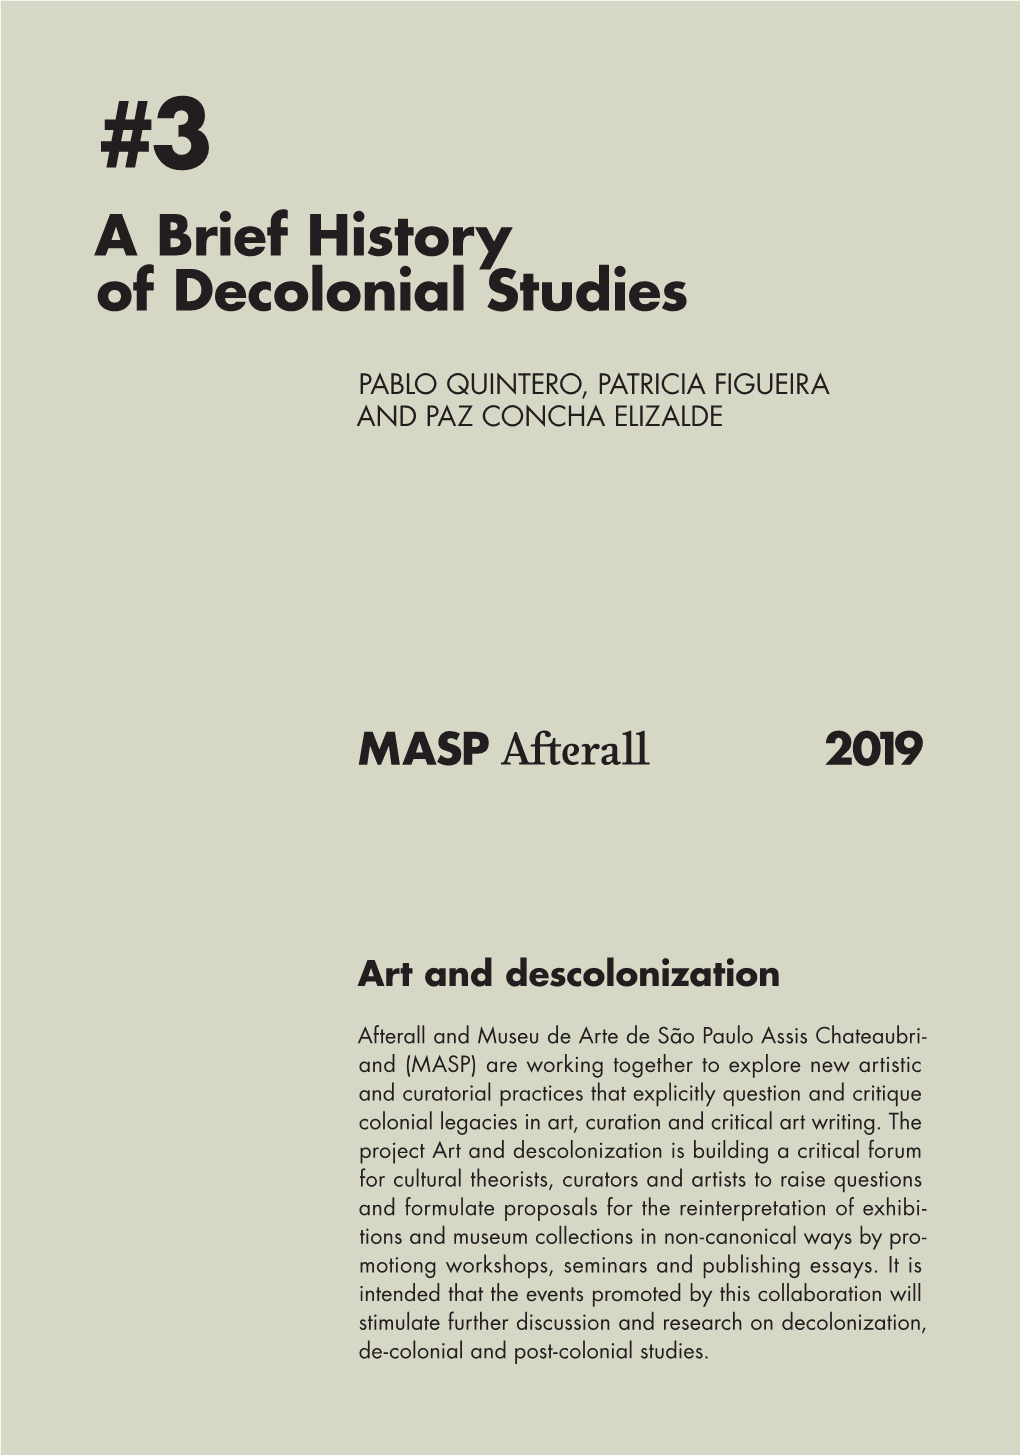 A Brief History of Decolonial Studies